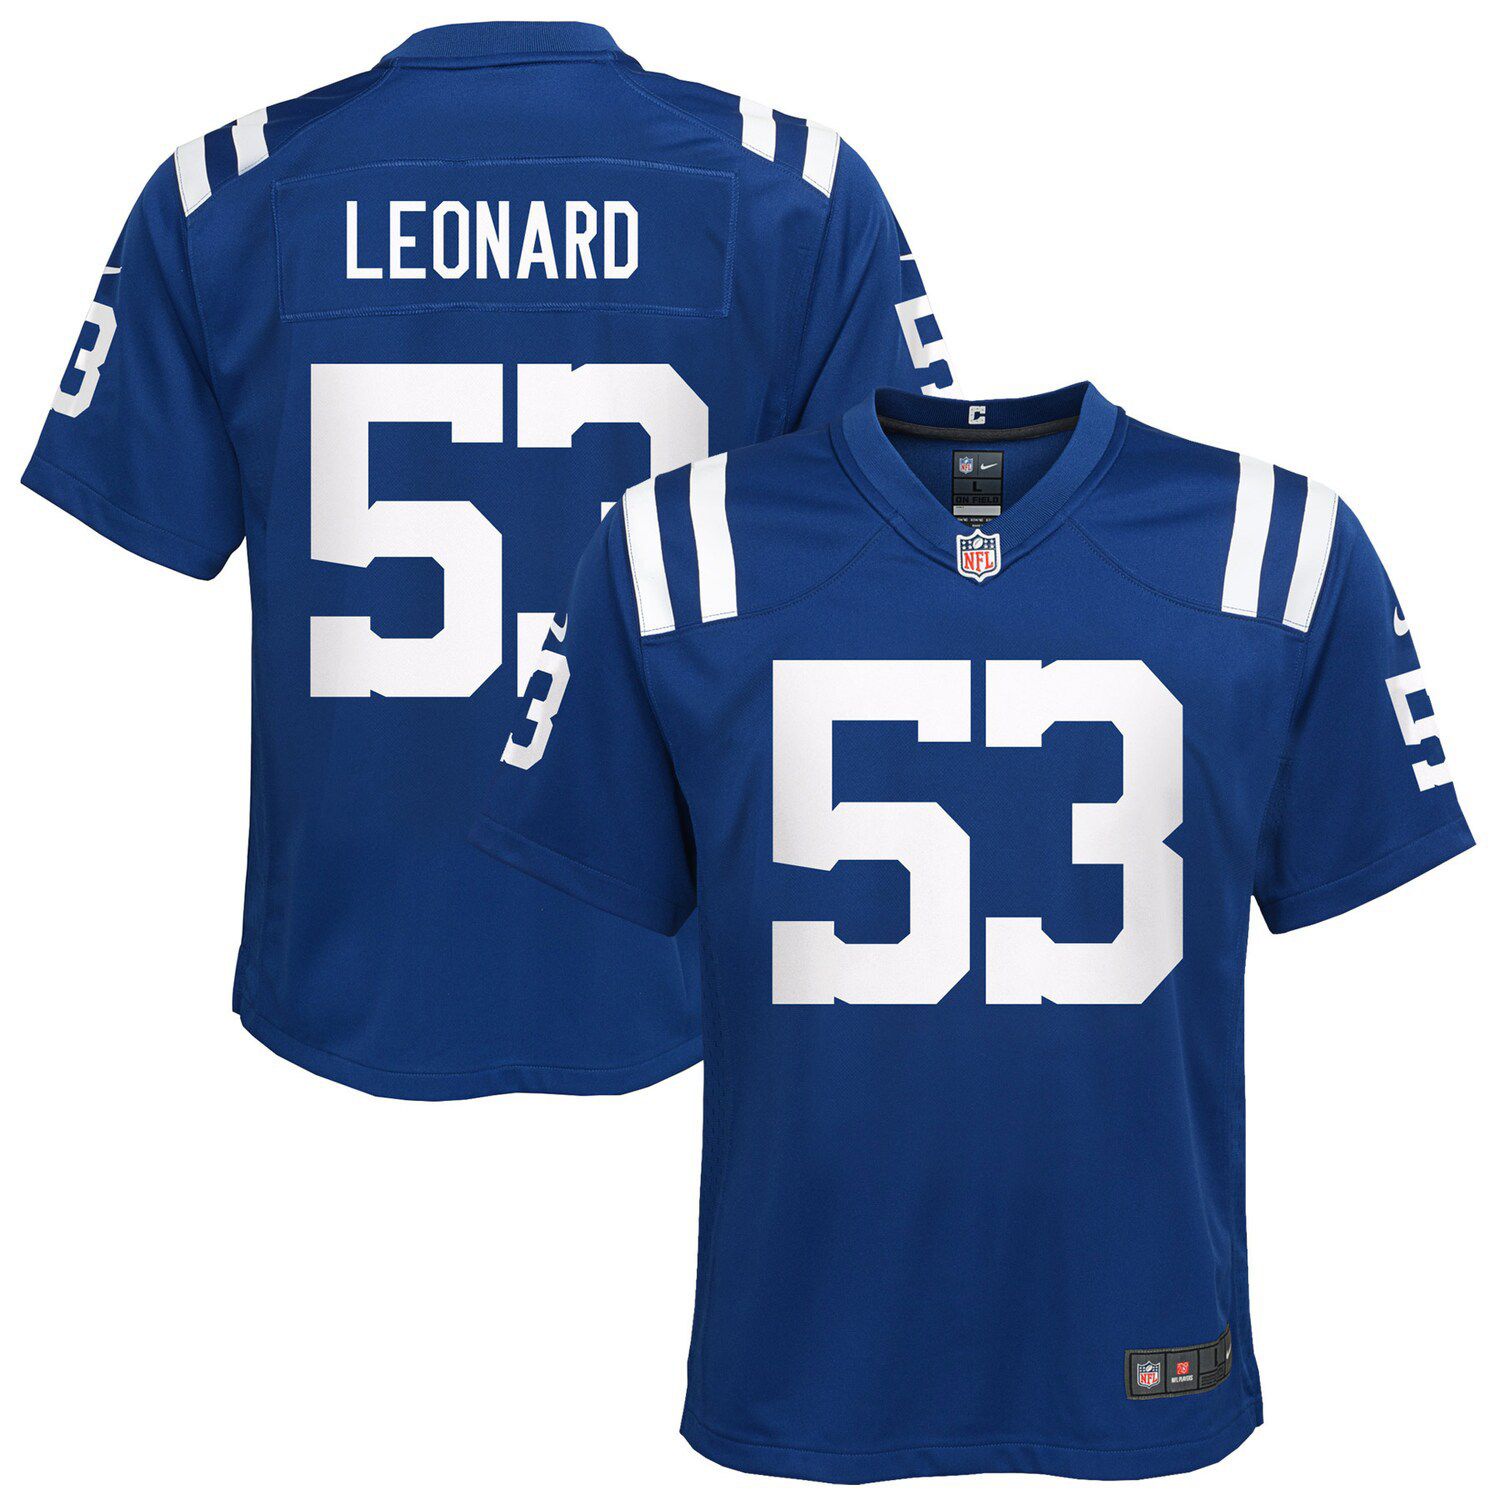 NFL Indianapolis Colts Jerseys | Kohl's